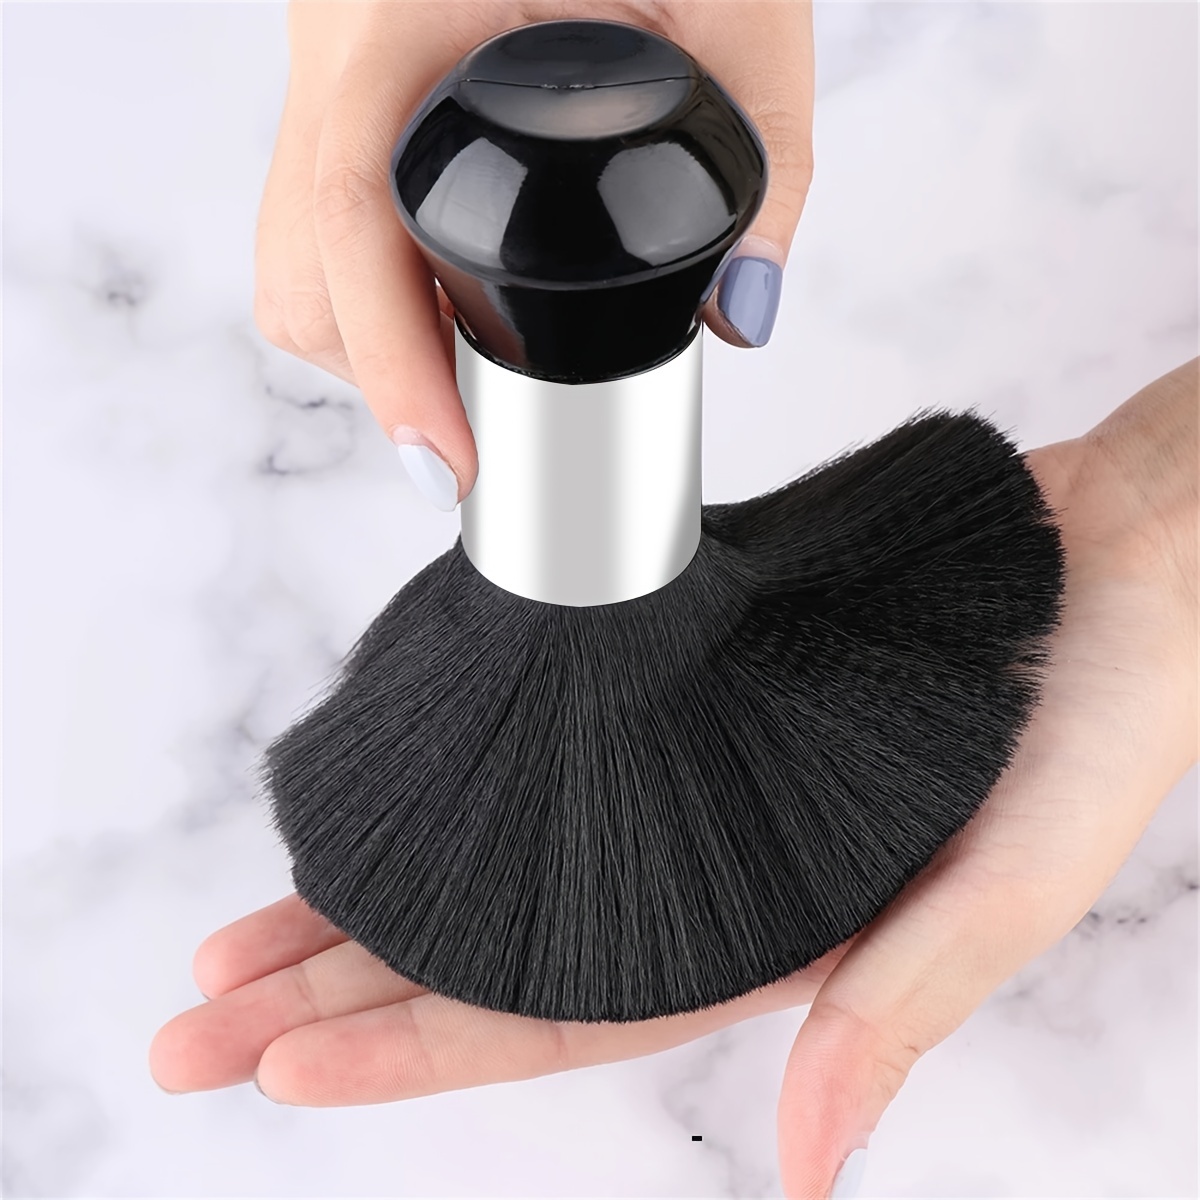 Barber Neck Brush for Hairdressers to Remove Clippings